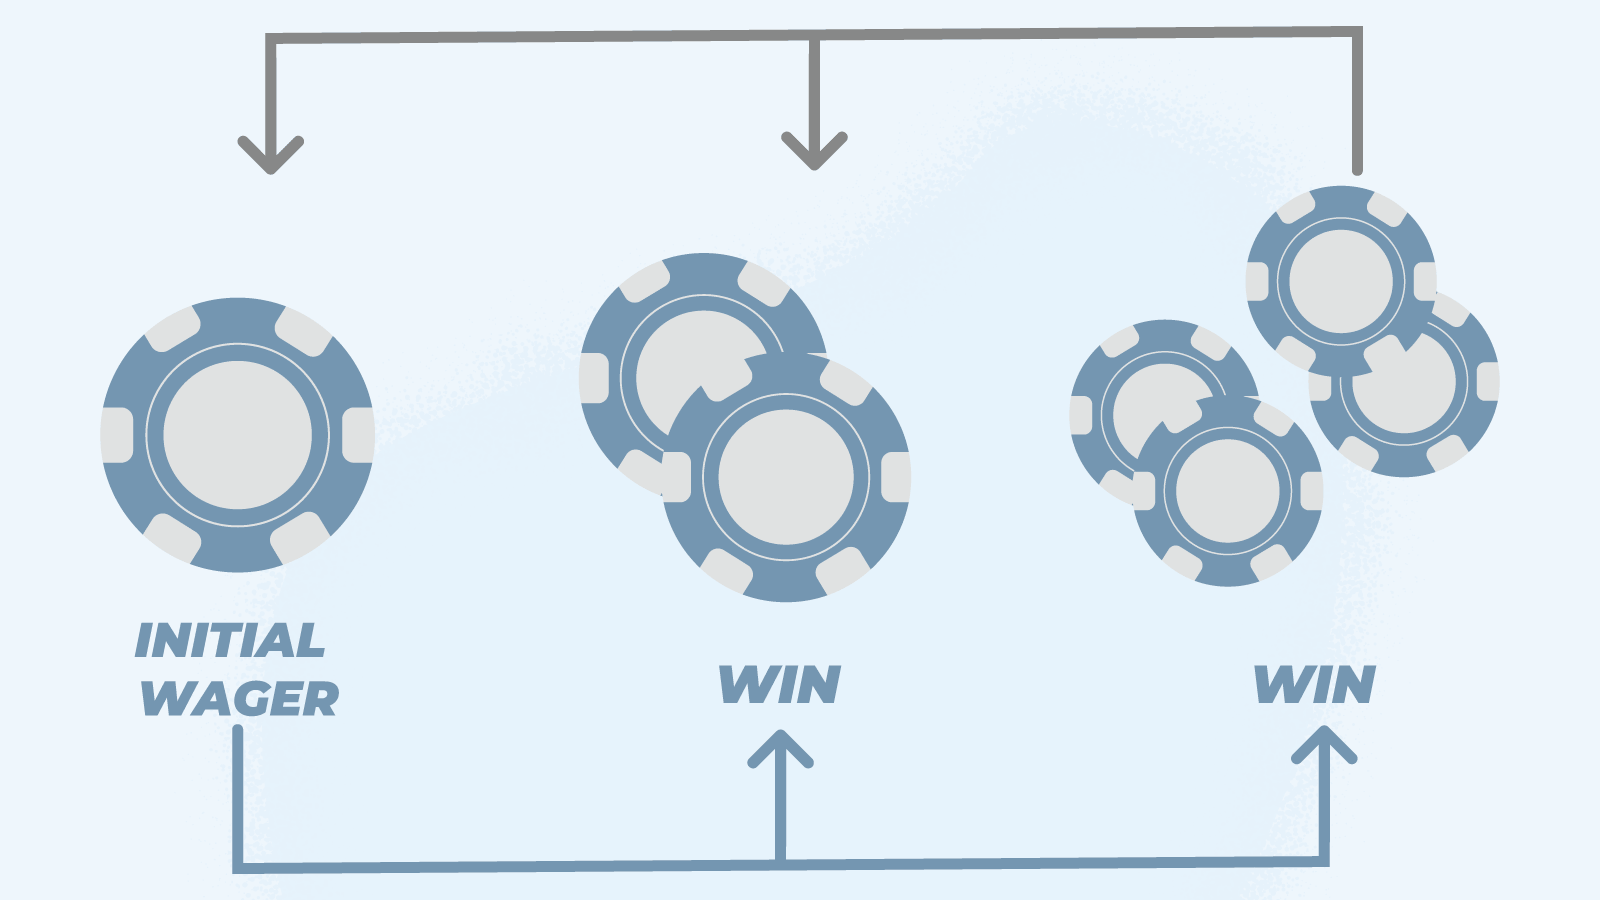 How to put Paroli Roulette strategy into practice